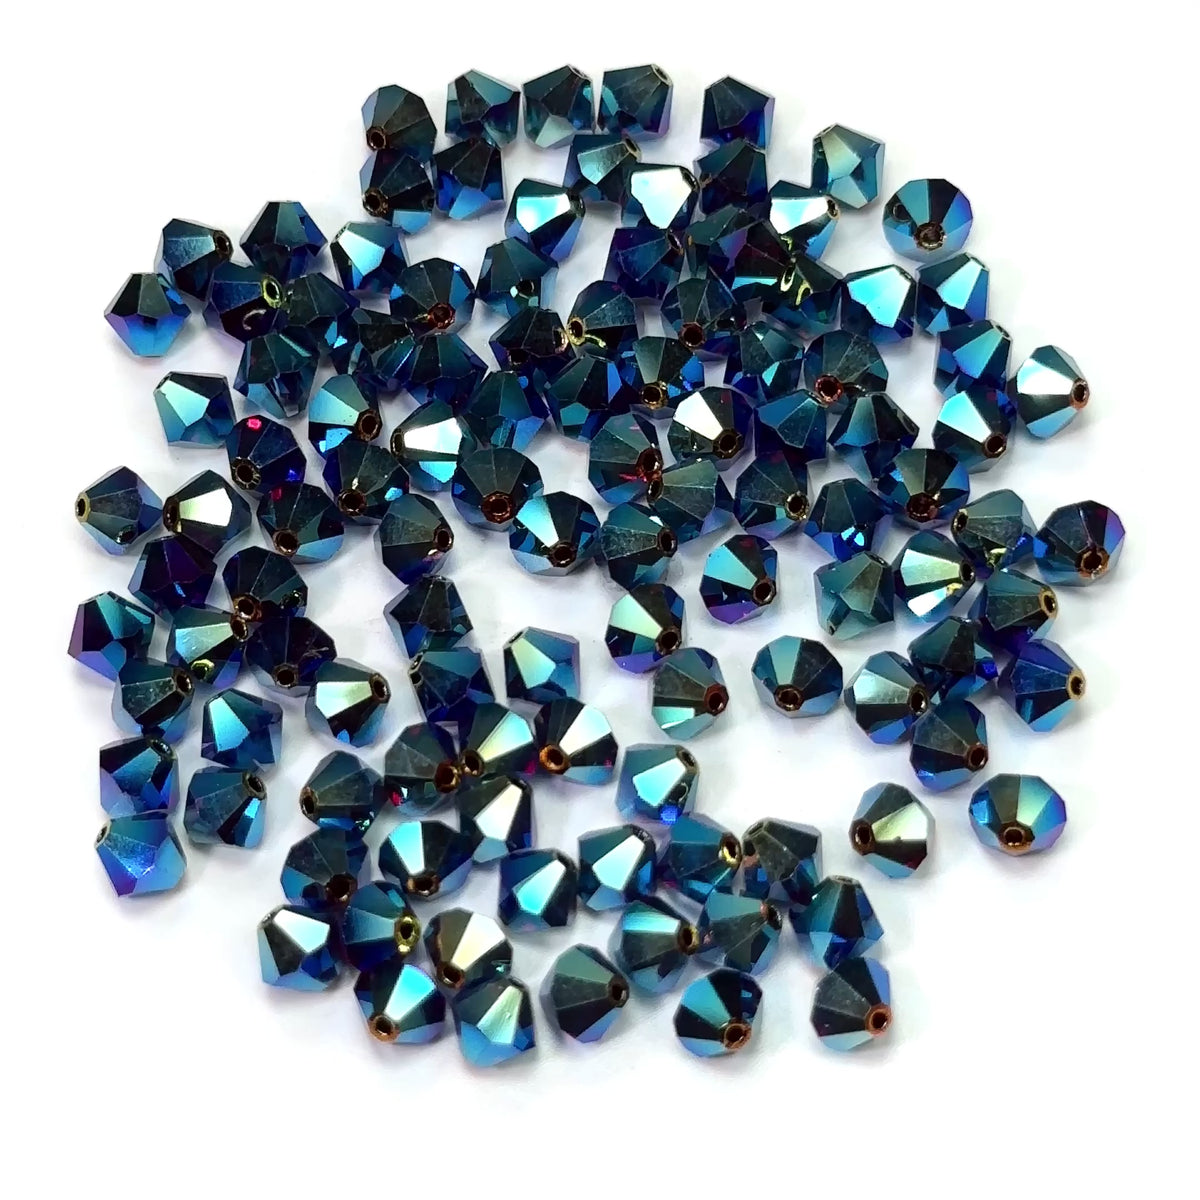 Crystal Light AB2X fully coated Czech Glass Beads Machine Cut Bicones -  Crystals and Beads for Friends